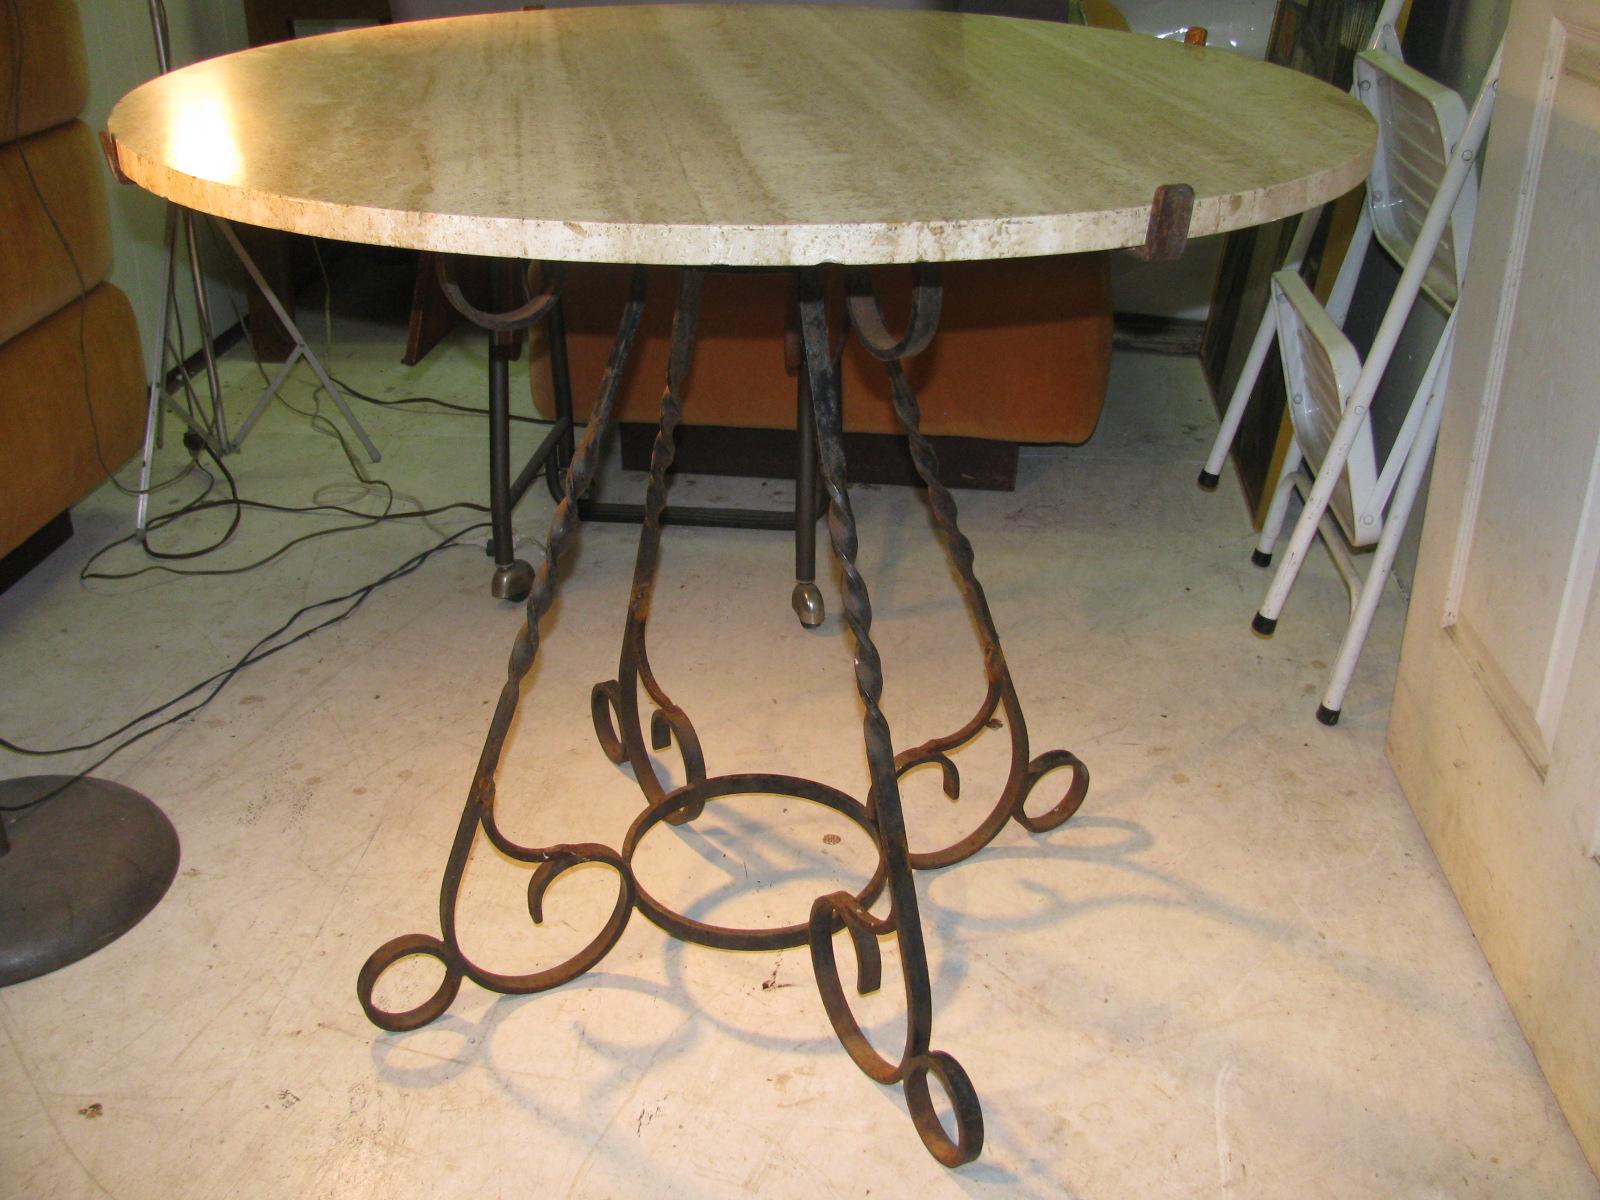 Italian Travertine Stone Round Top with Wrought Iron Base Dining Table 1